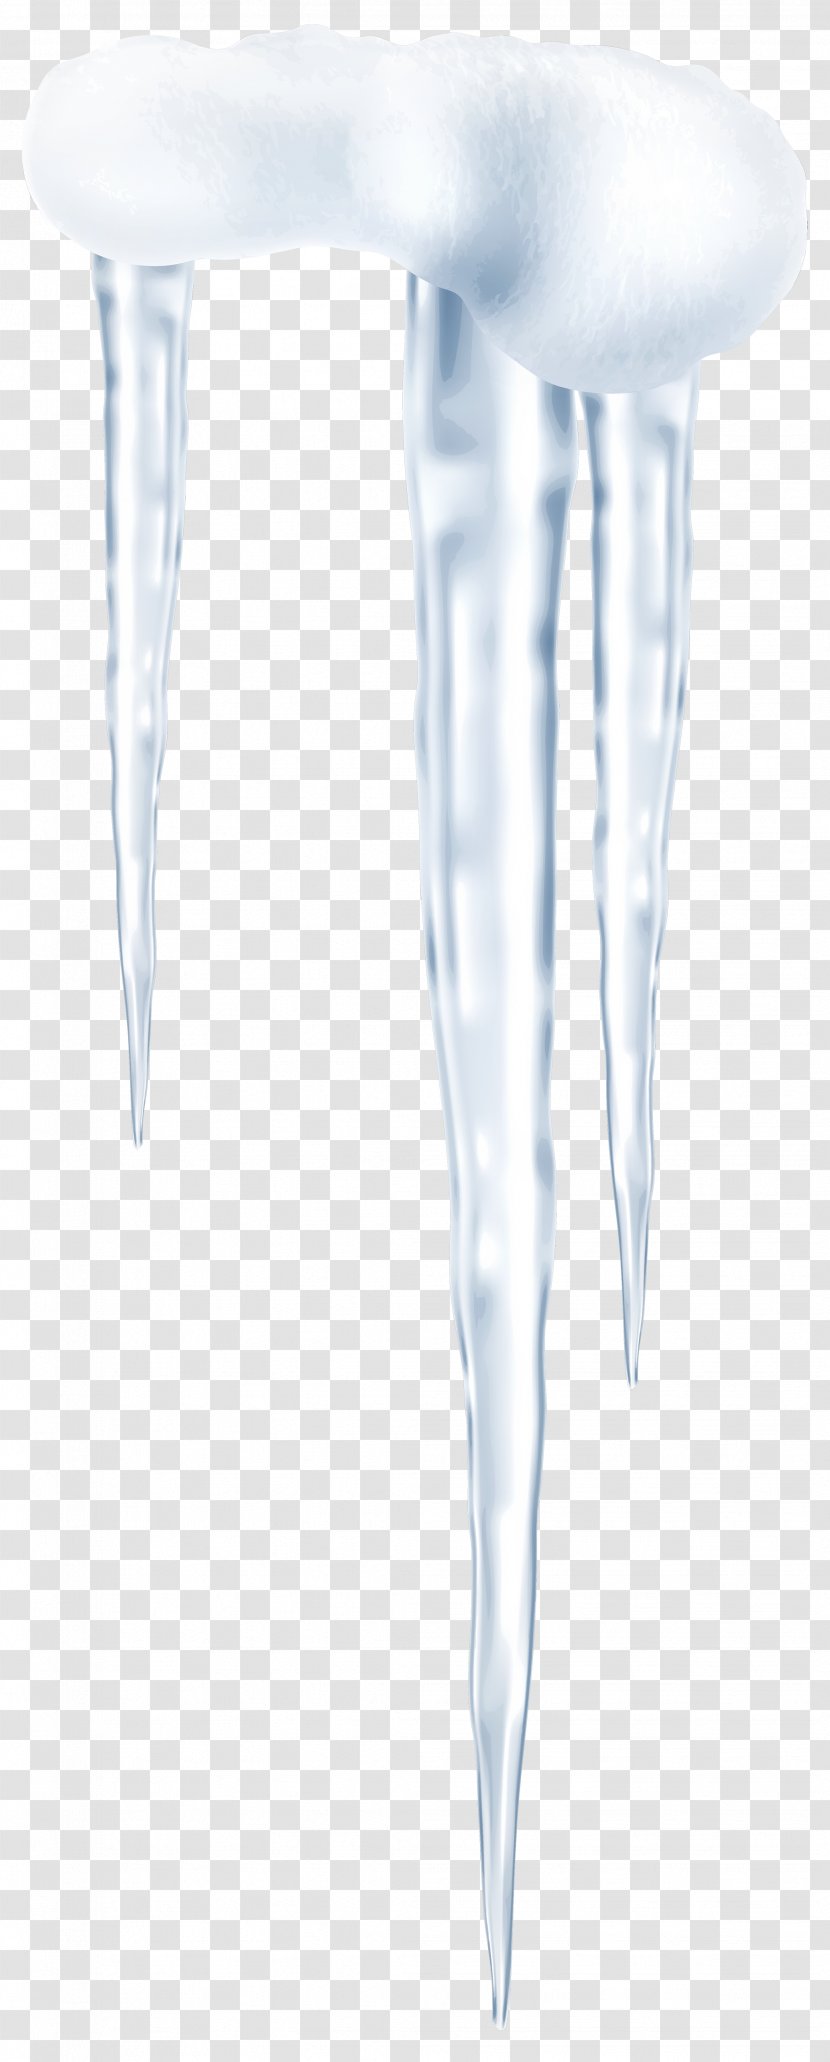 Ice - Small Icicles Transparent Clip Art Image Transparent PNG